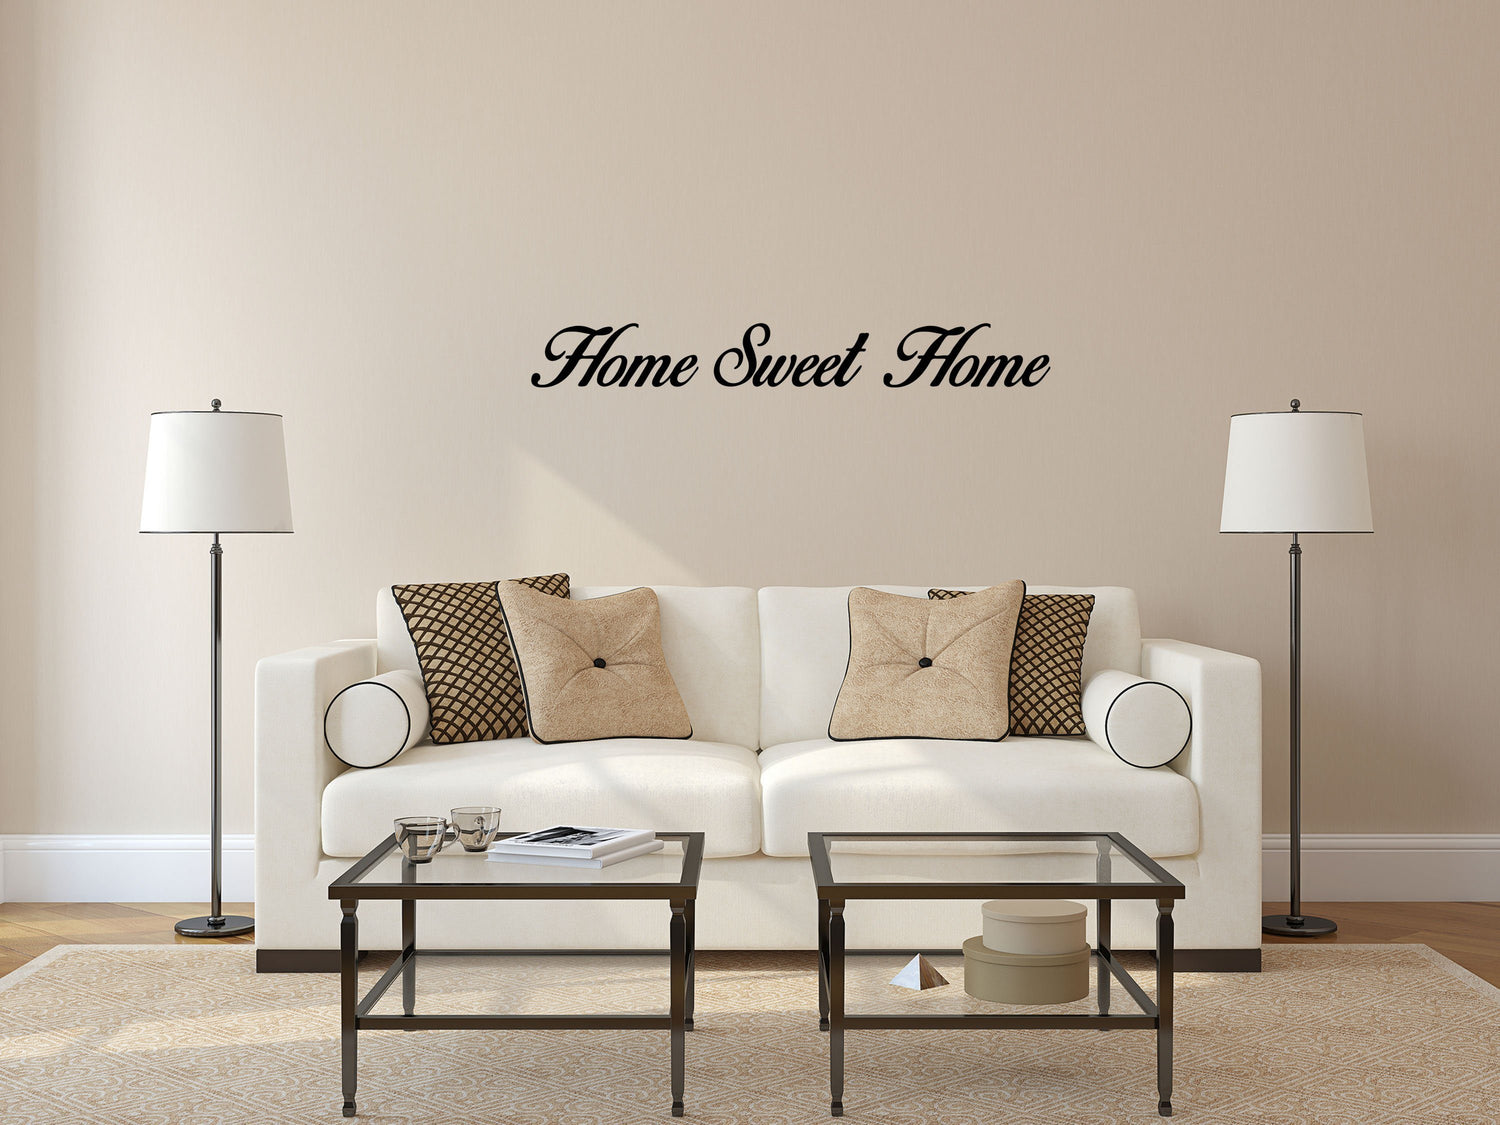 Home Sweet Home - Inspirational Wall Decals Vinyl Wall Decal Inspirational Wall Signs 